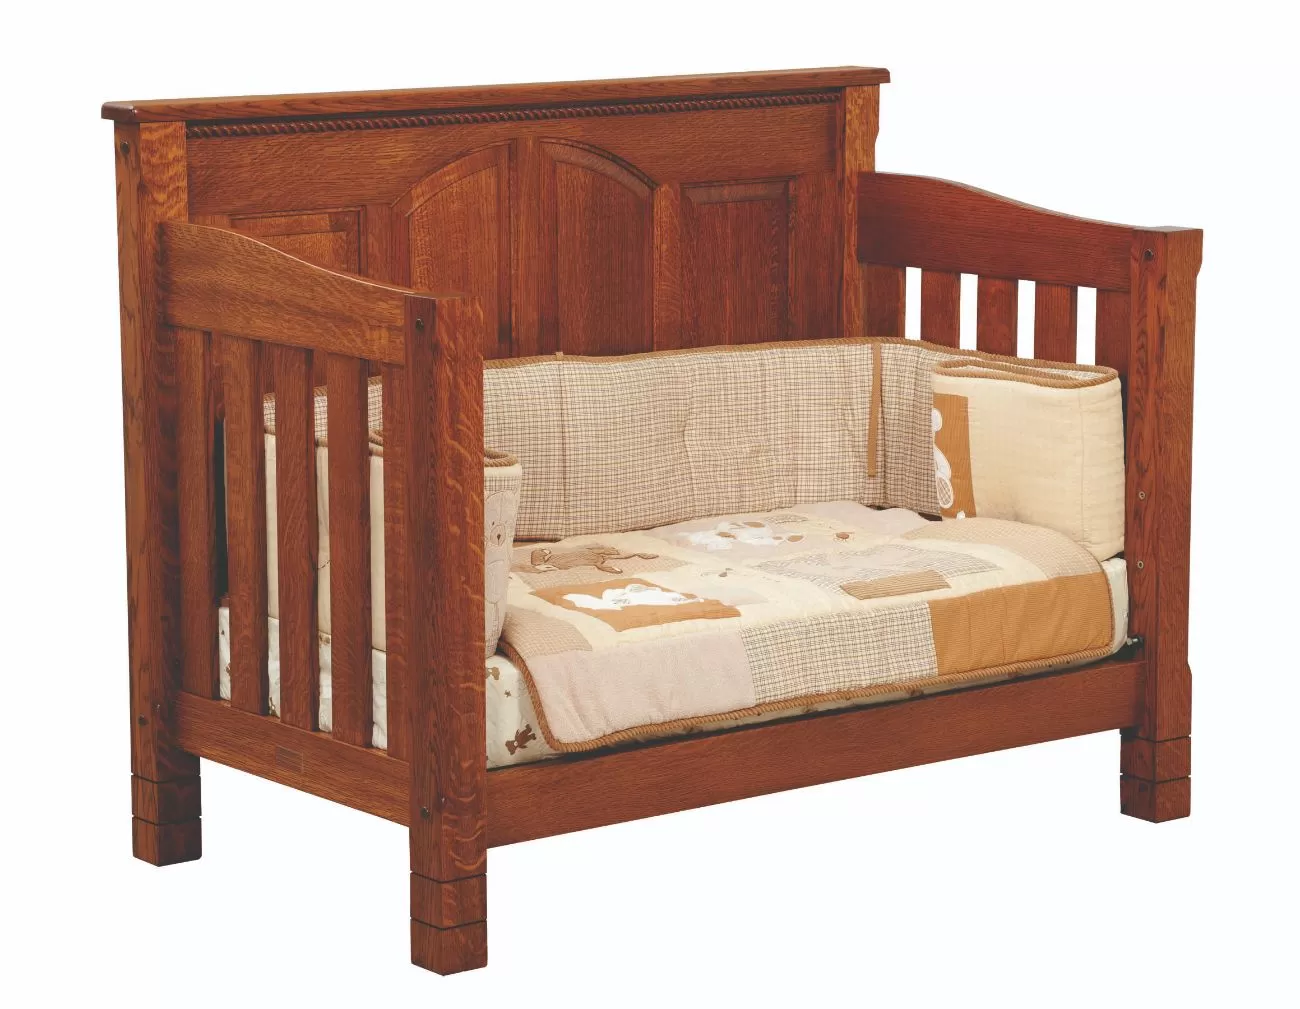 West lake 701a toddler bed